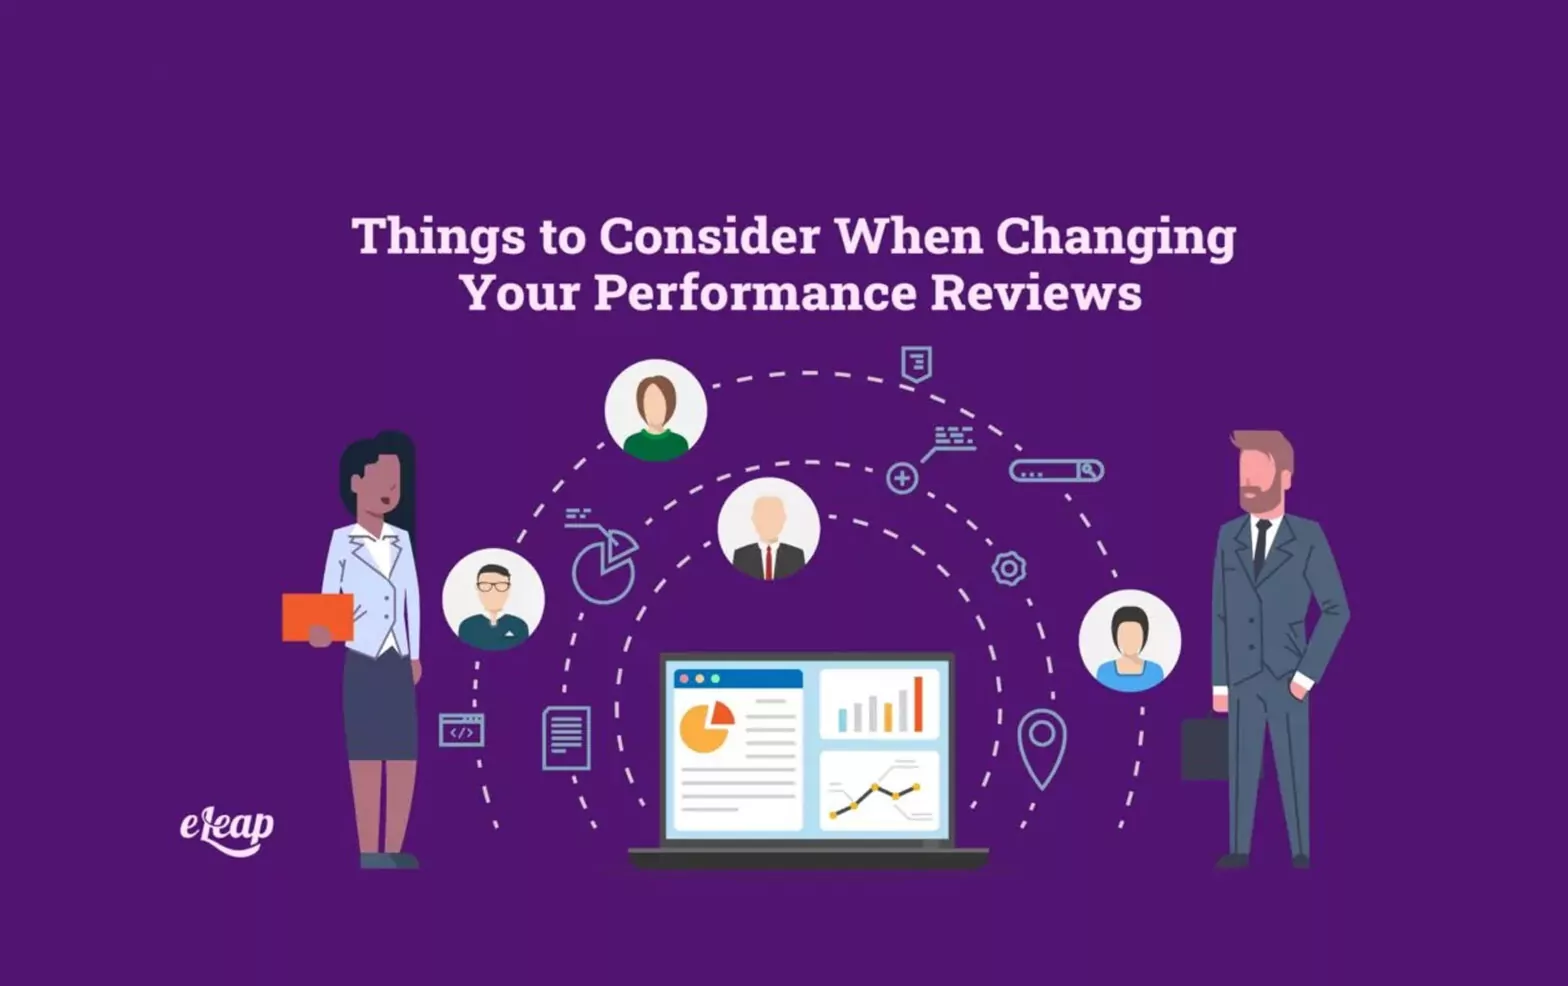 Things to Consider When Changing Your Performance Reviews